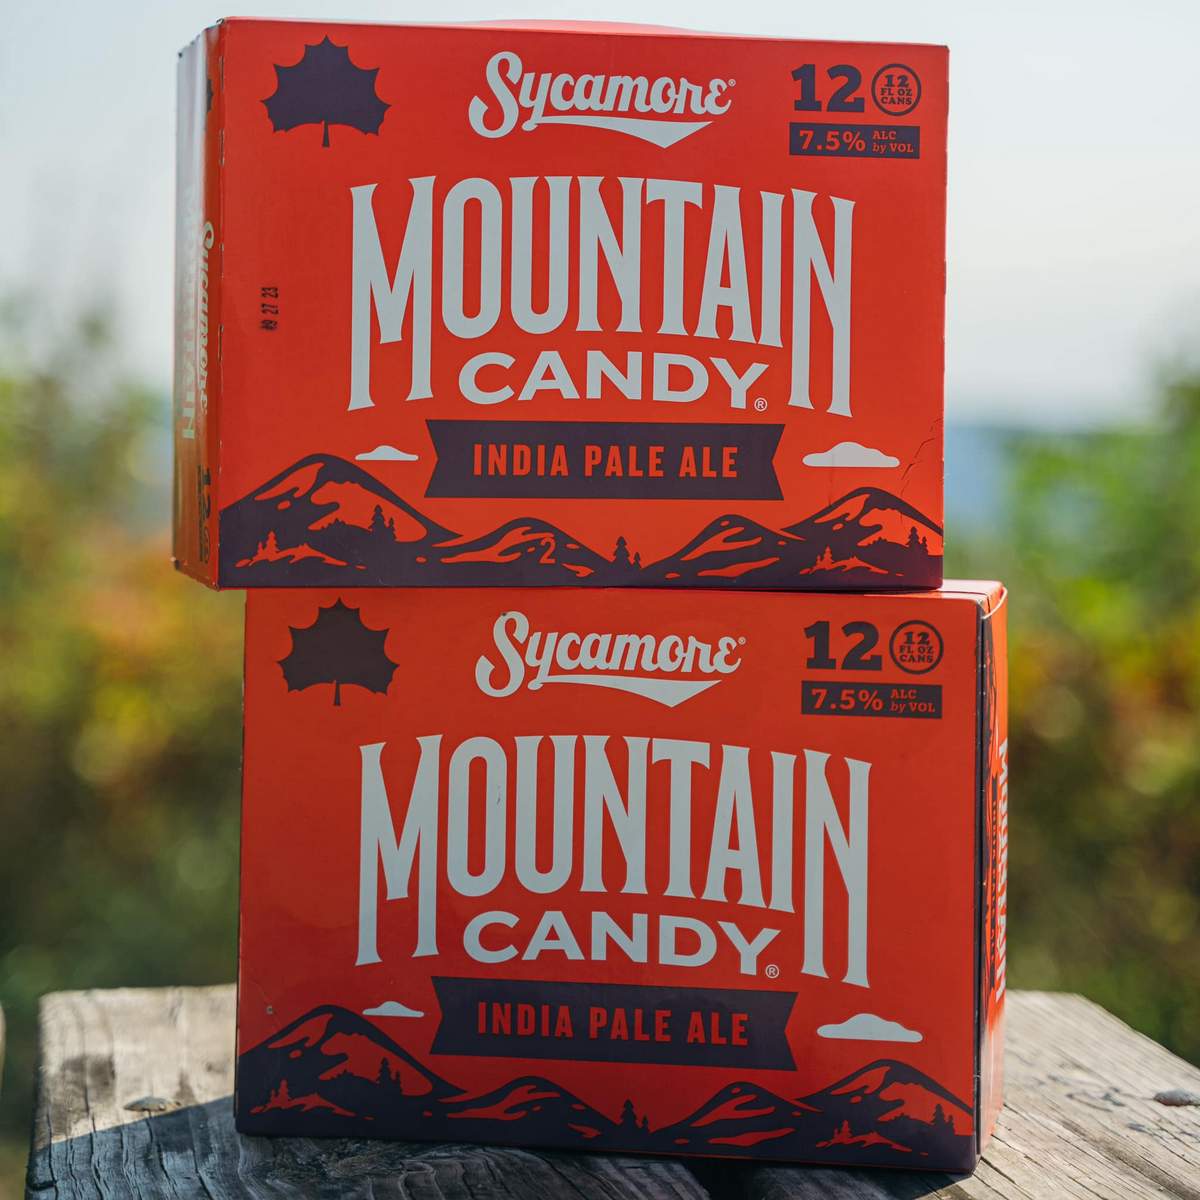 Sycamore Mountain Candy INdia Pale Ale 12 packs stacked